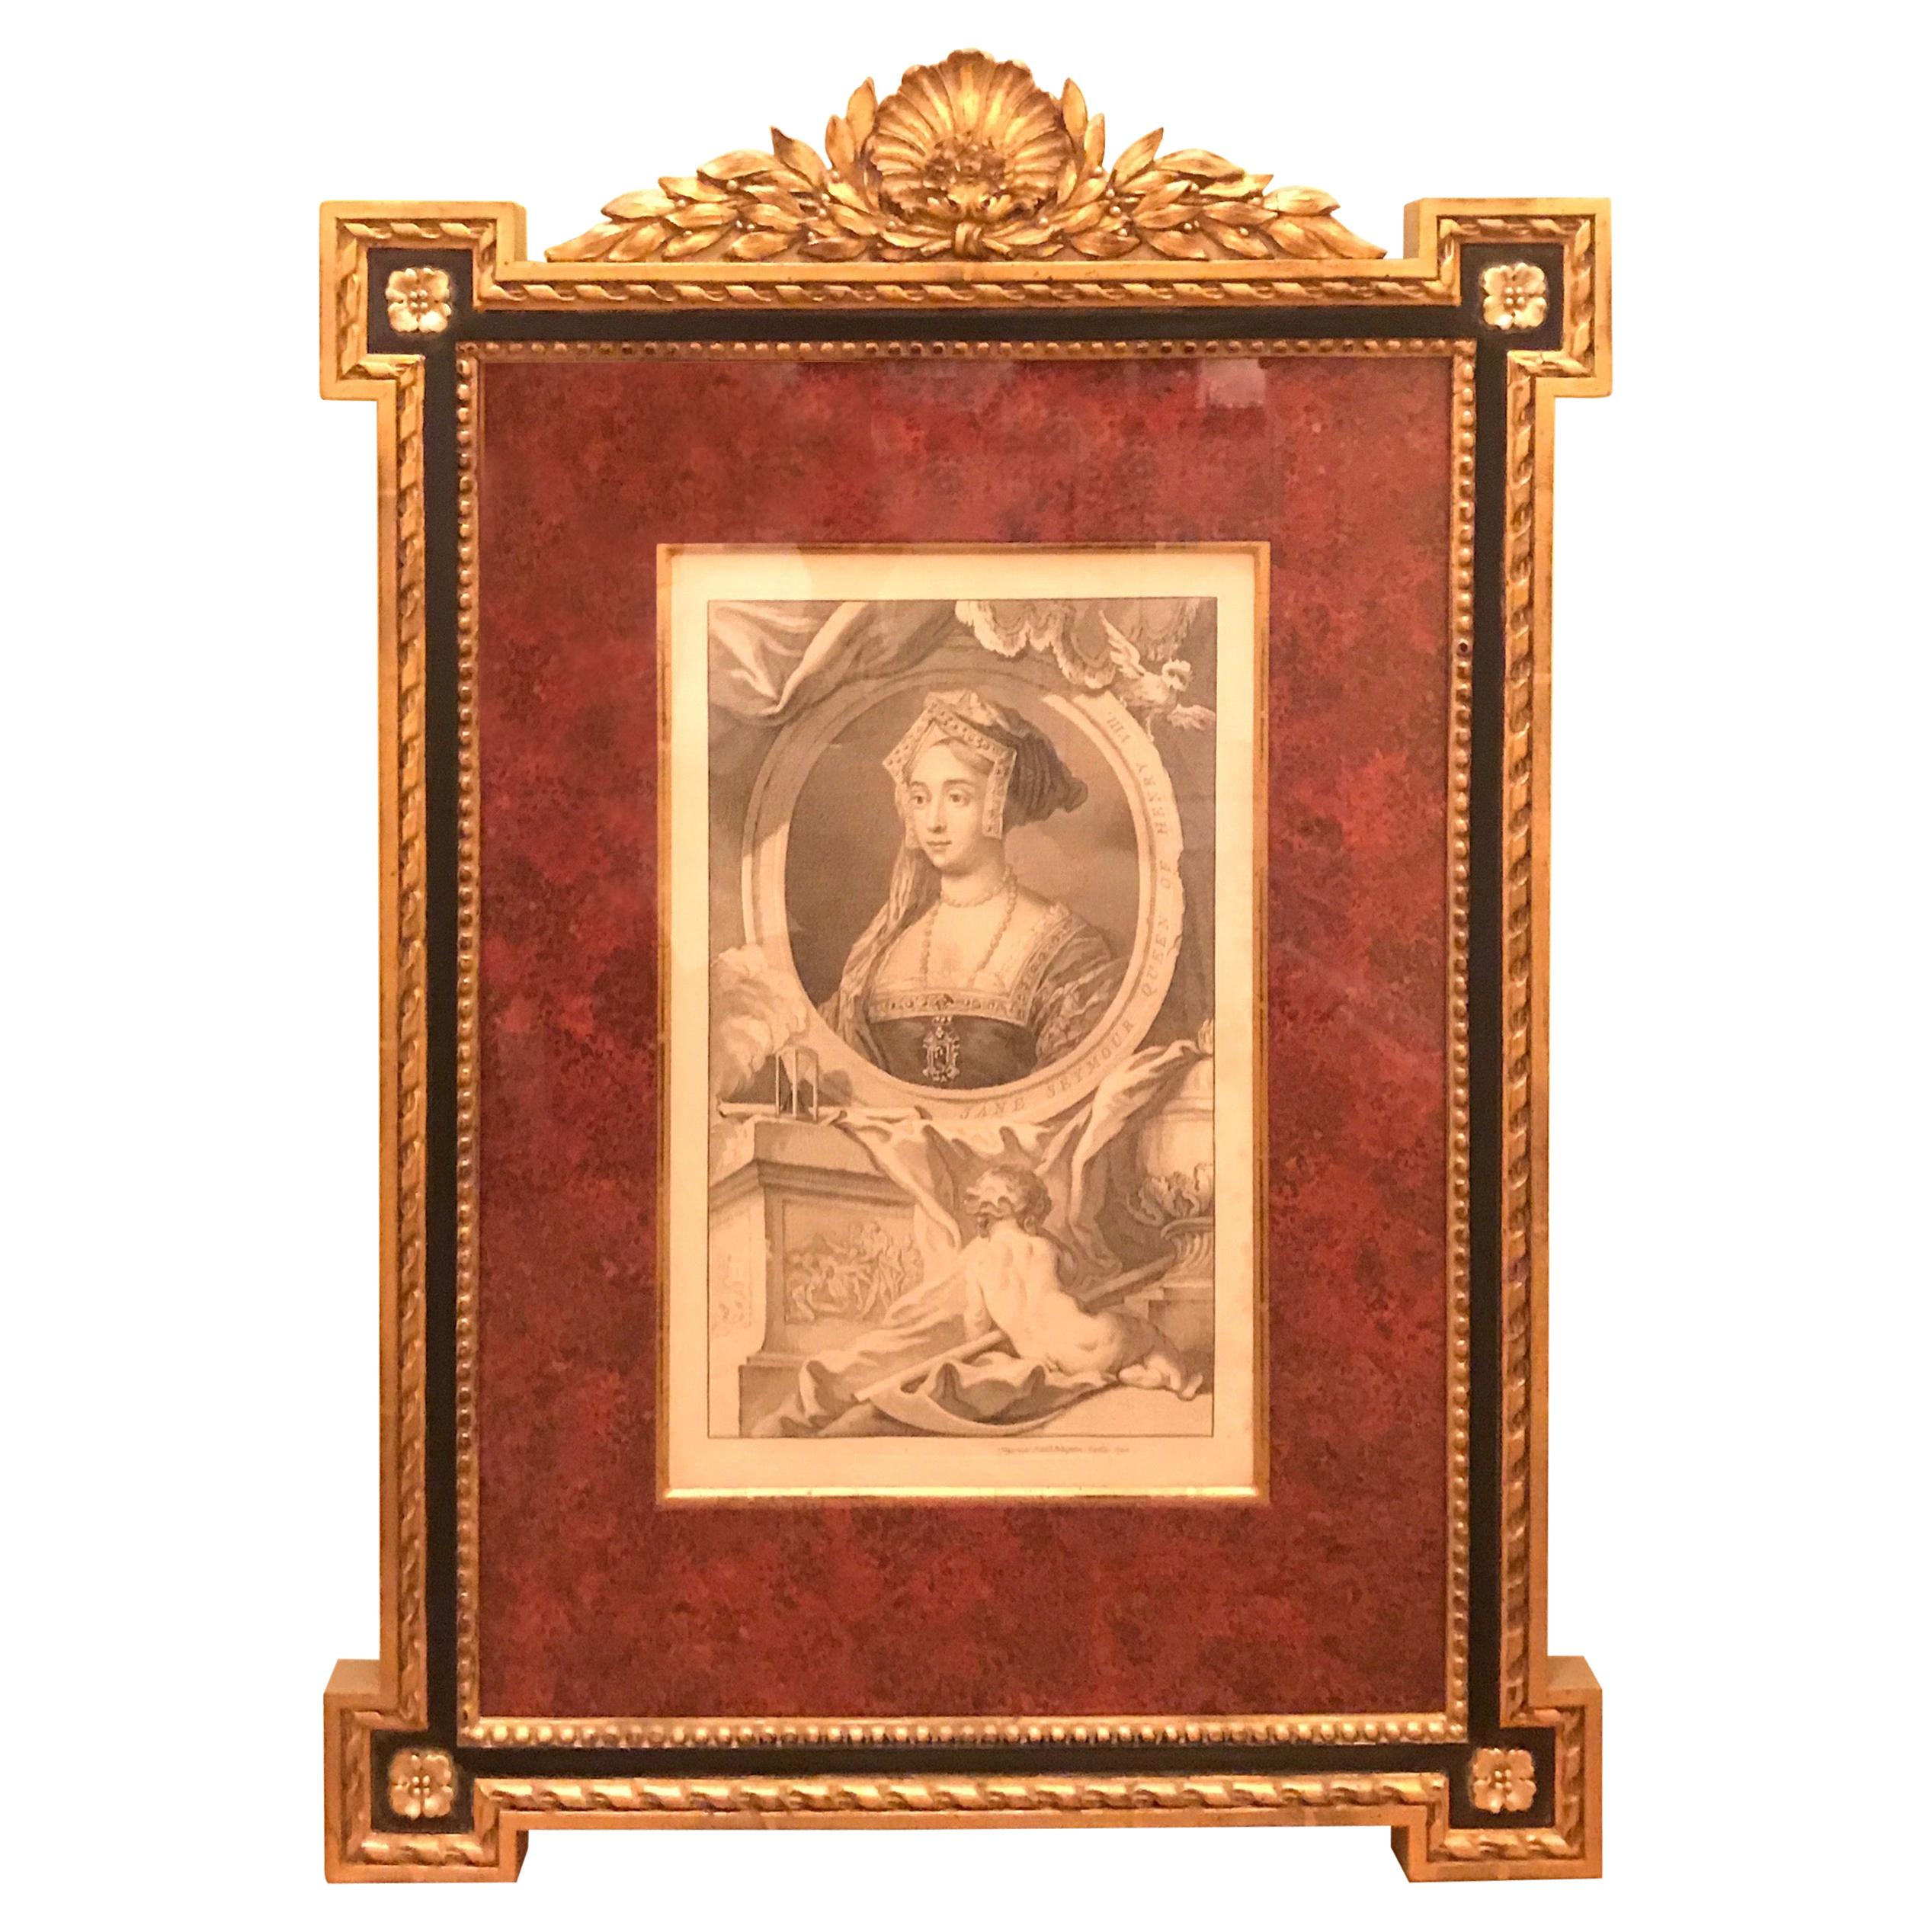 18th Century Copper Engraving in Giltwood Frame Published in 1746, Jane Seymour